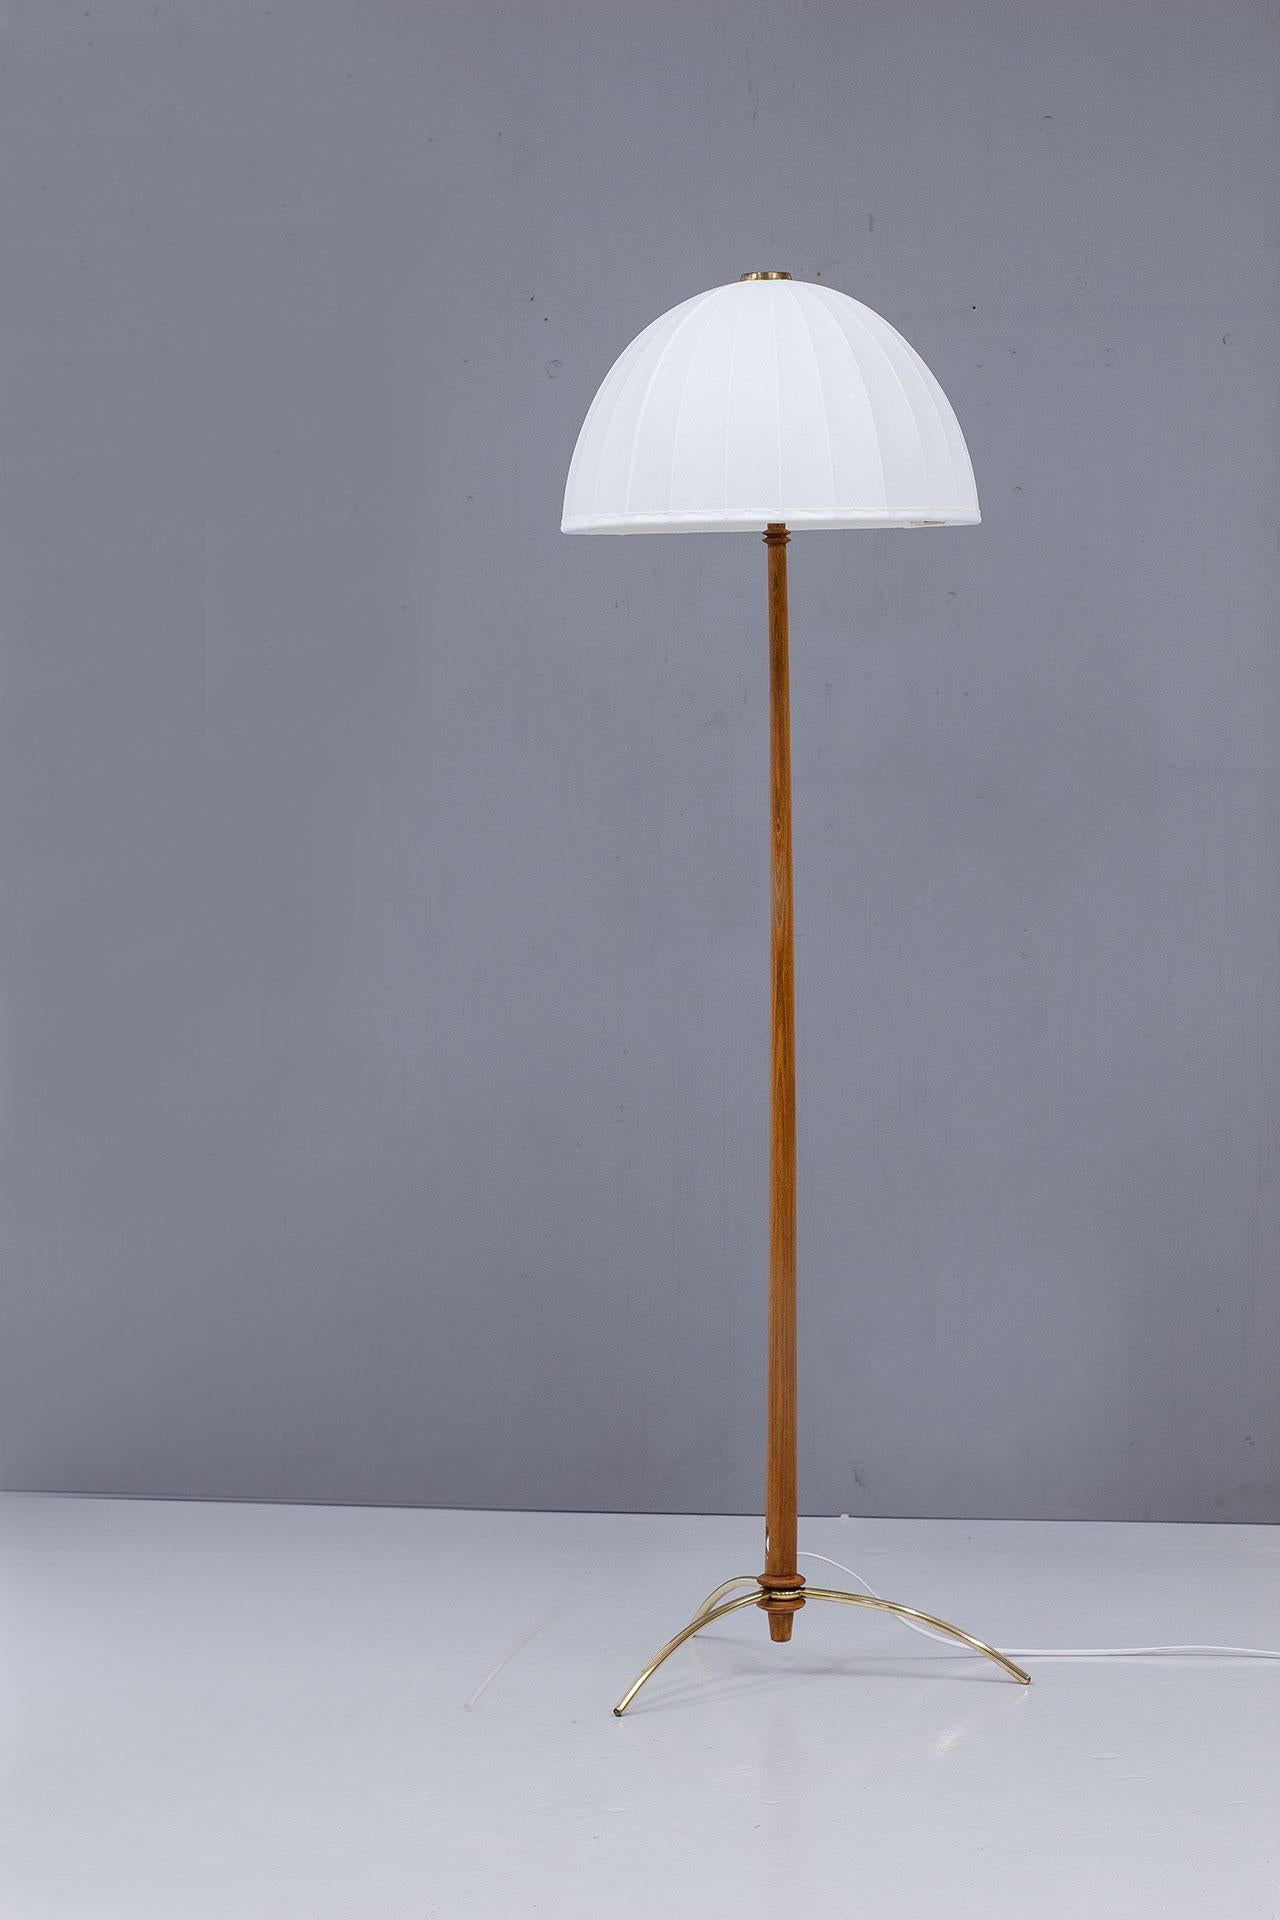 Vintage floor lamp, model G45, designed and manufactured by Hans-Agne Jakobsson in Sweden during the 1950s. The lamp features a stained beech stem and a brass tripod base, it comes with its original lamp shade that has been reupholstered in